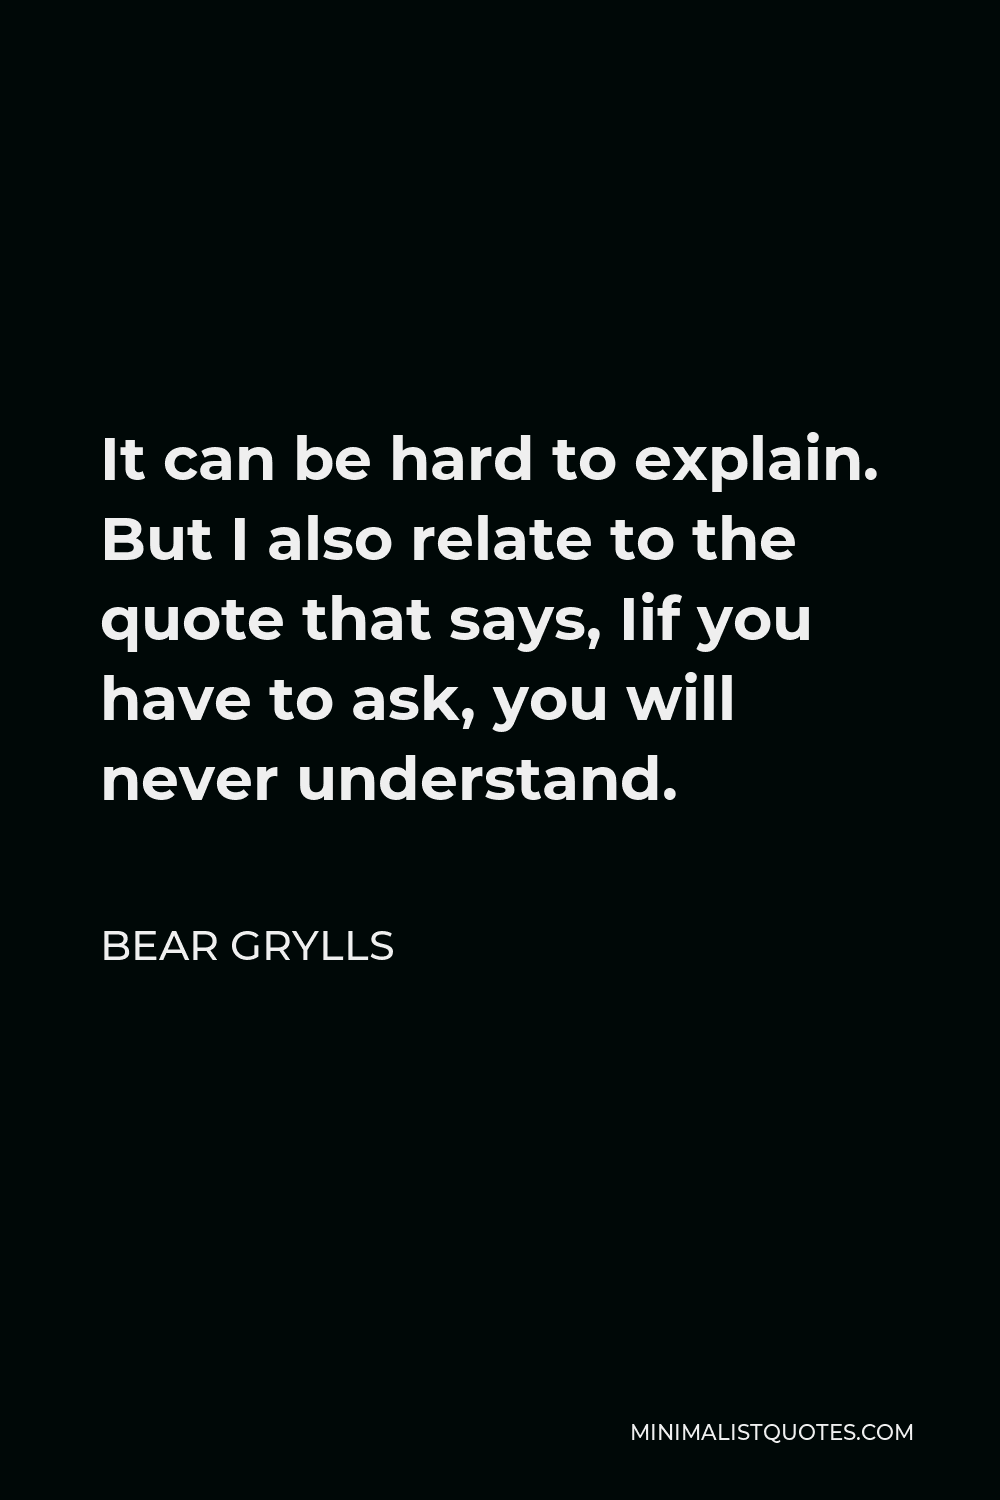 Bear Grylls Quote - It can be hard to explain. But I also relate to the quote that says, Iif you have to ask, you will never understand.